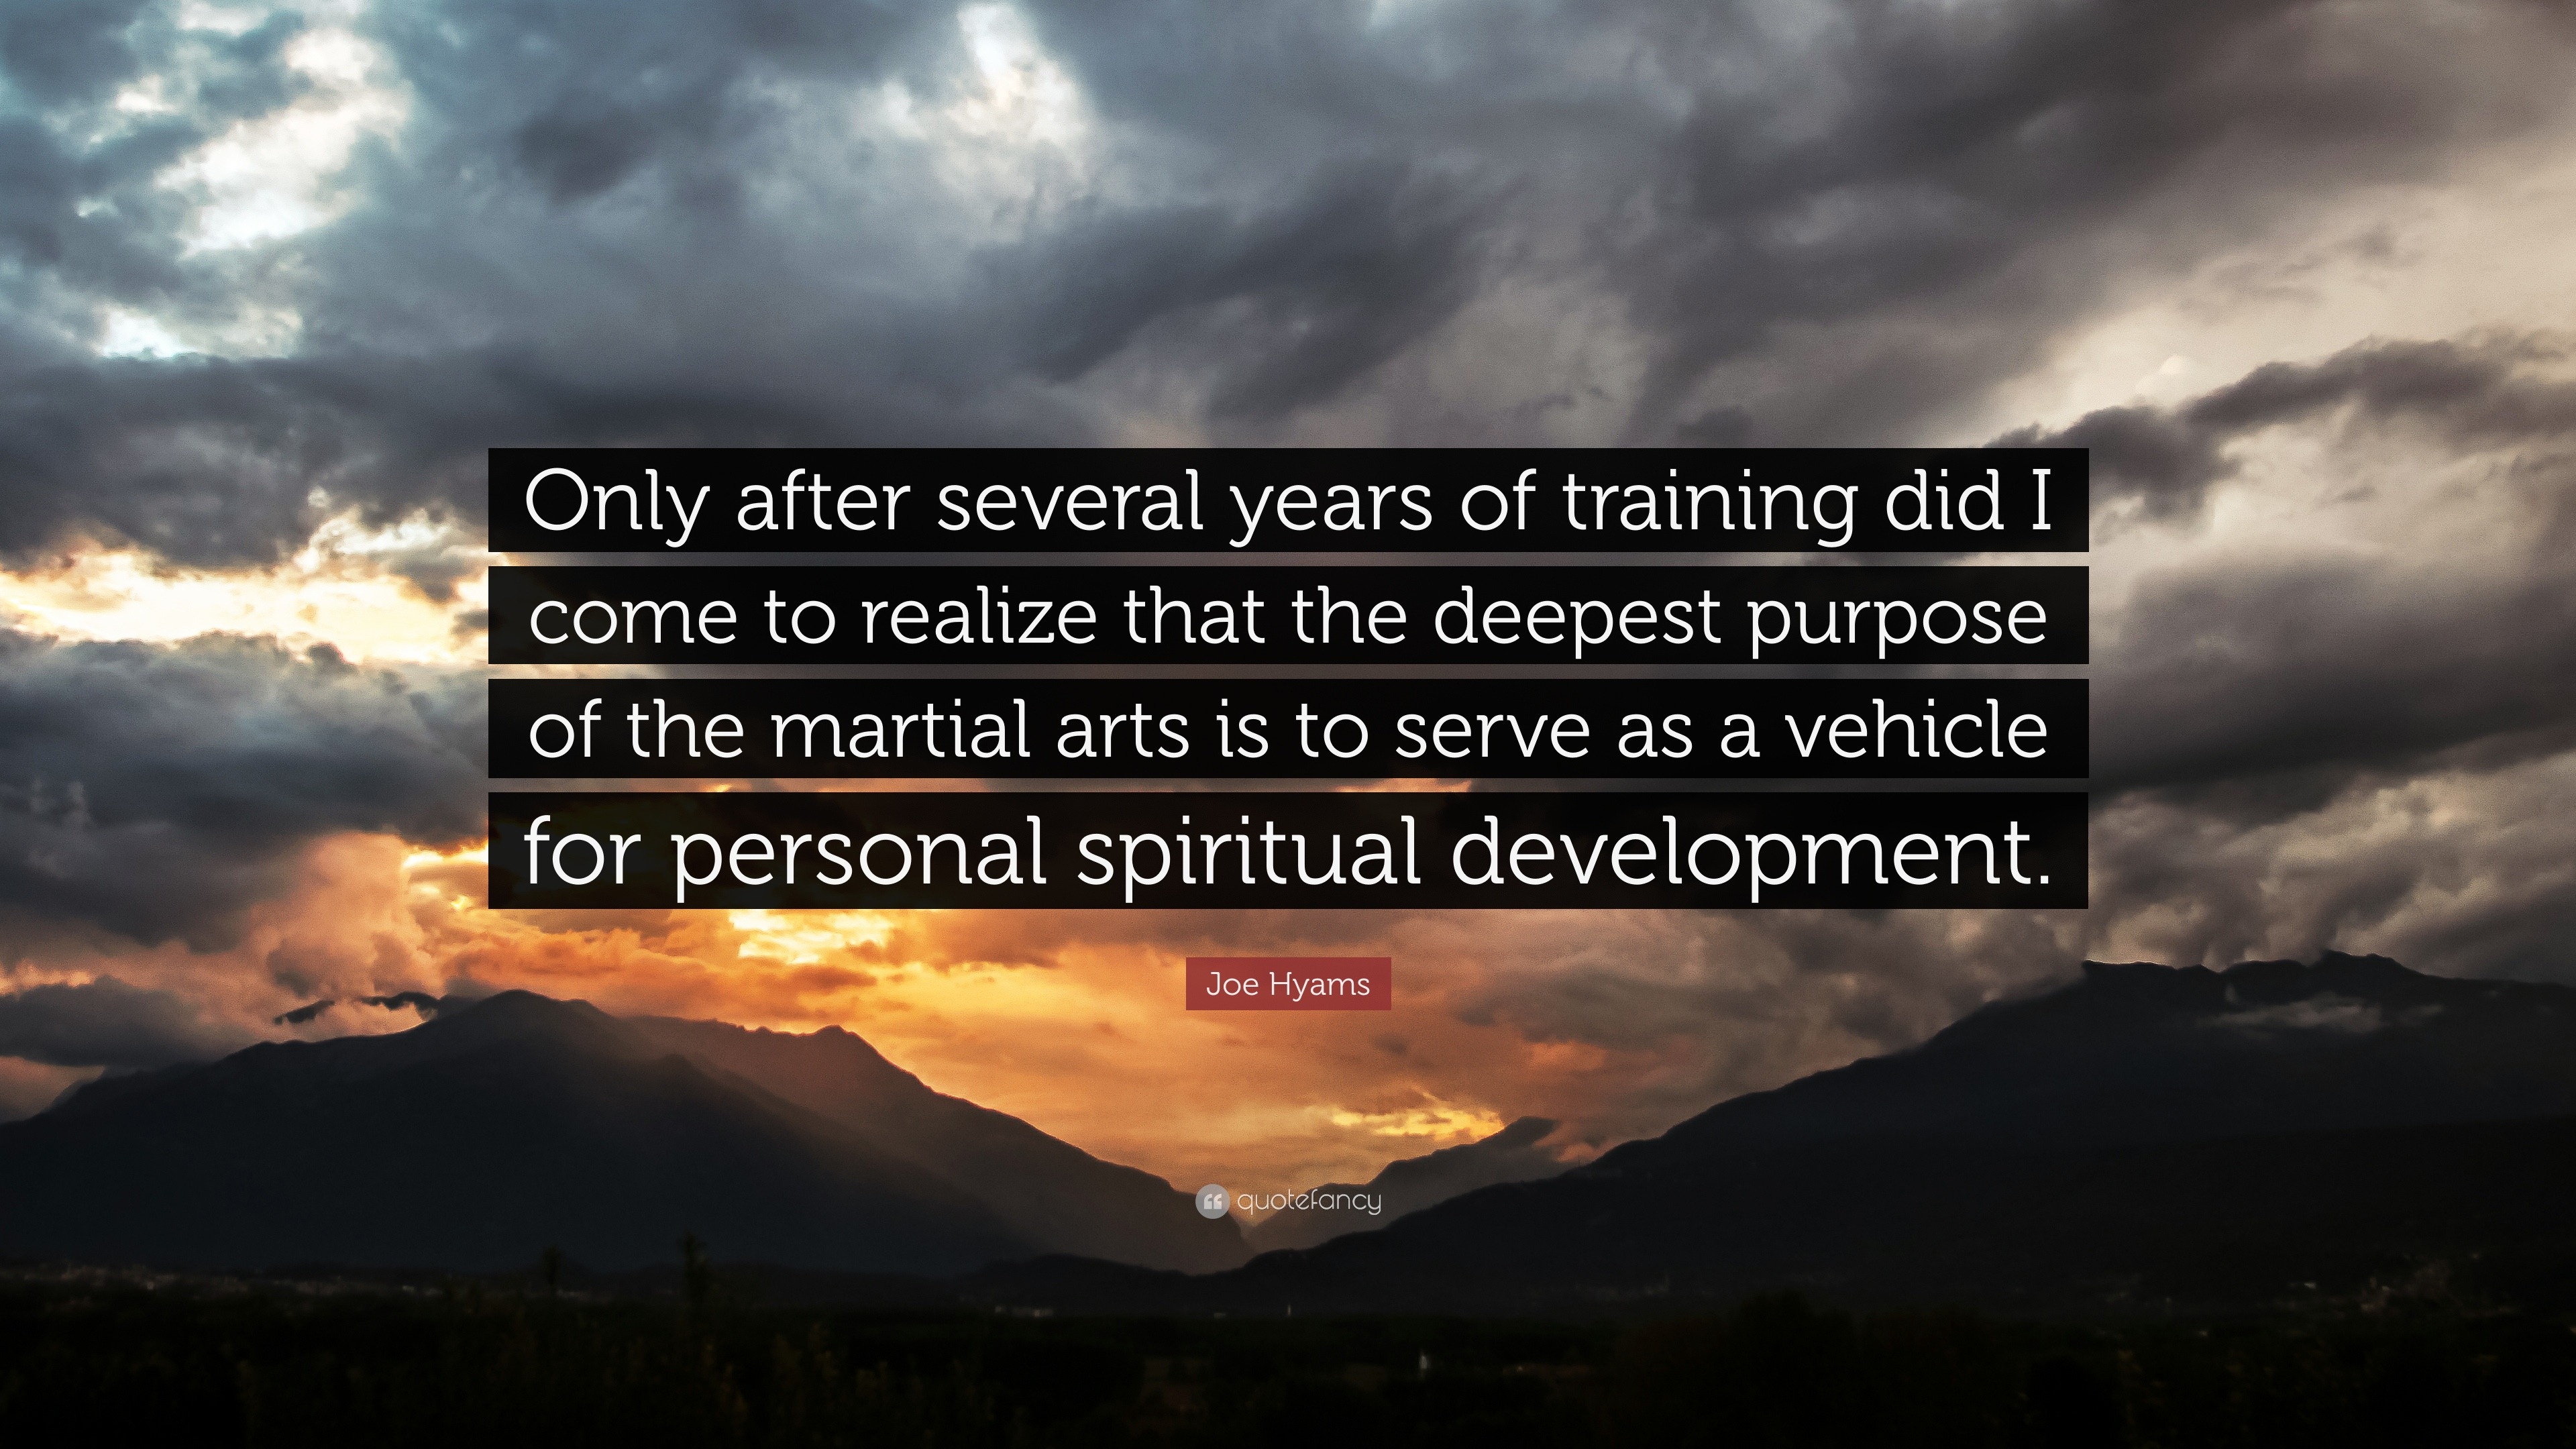 Joe Hyams Quote: “Only after several years of training did I come to  realize that the deepest purpose of the martial arts is to serve as a...”